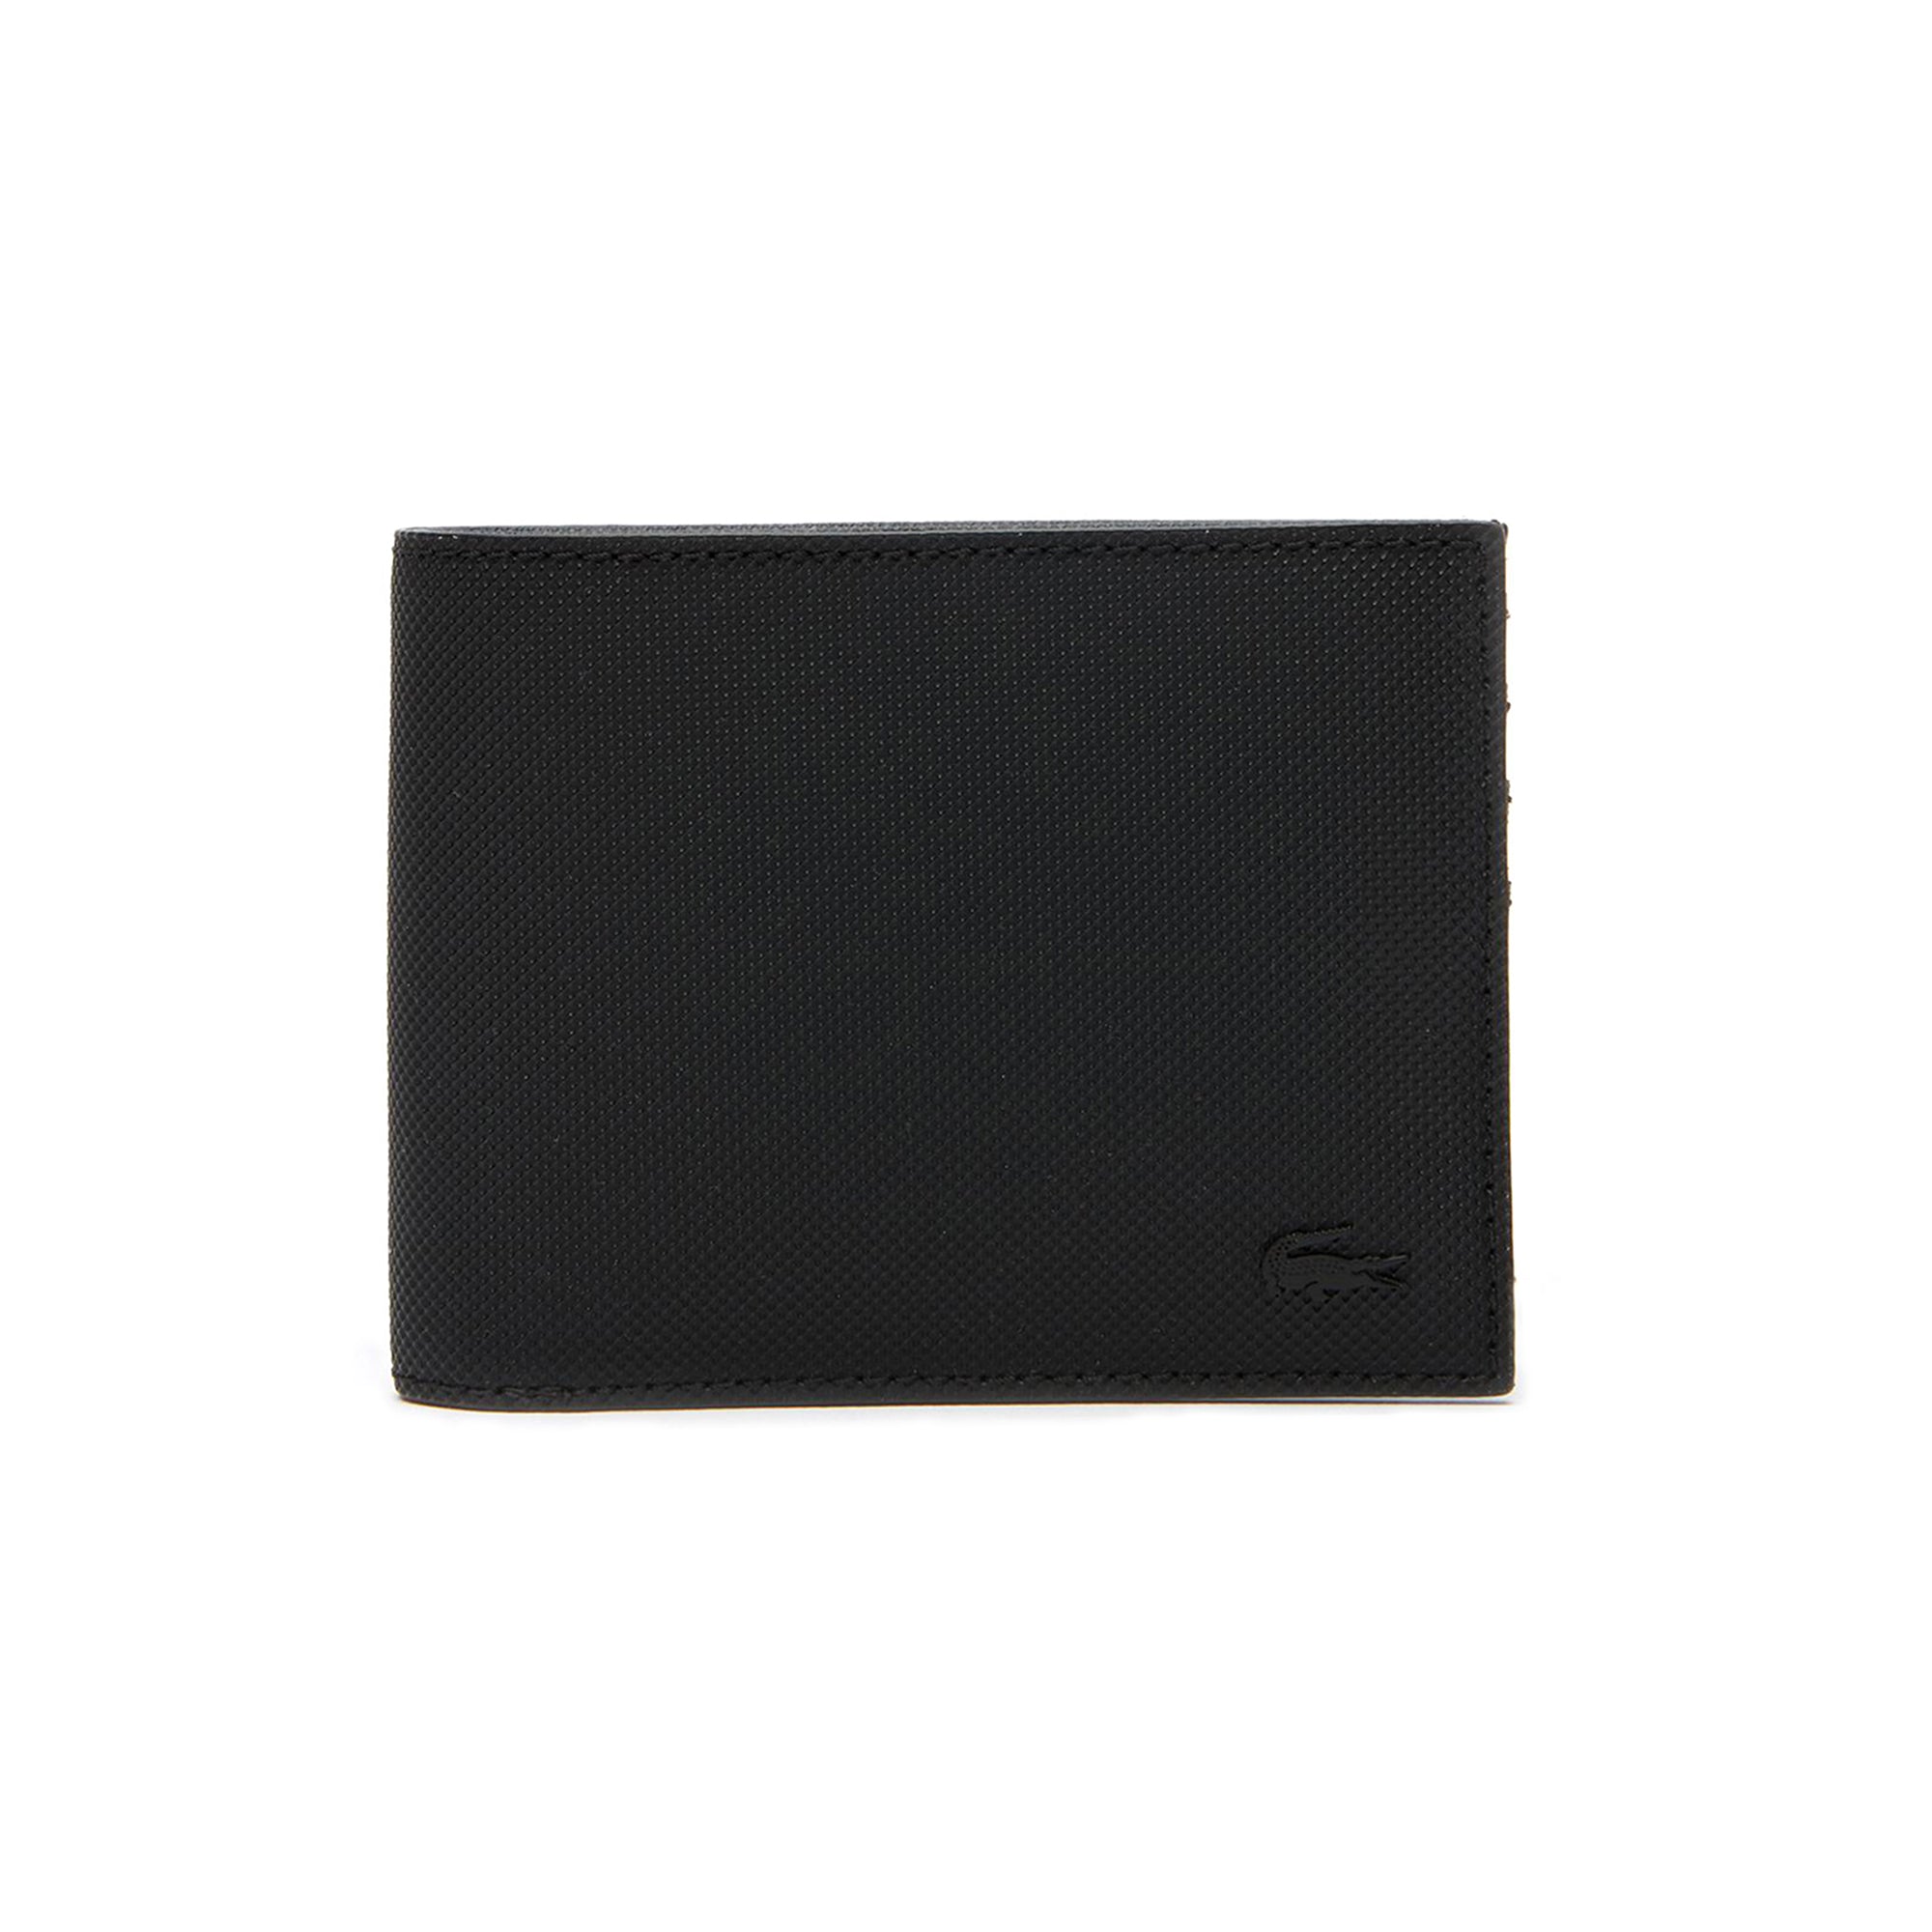 lacoste-classic-card-wallet-nh2308hc-black-000